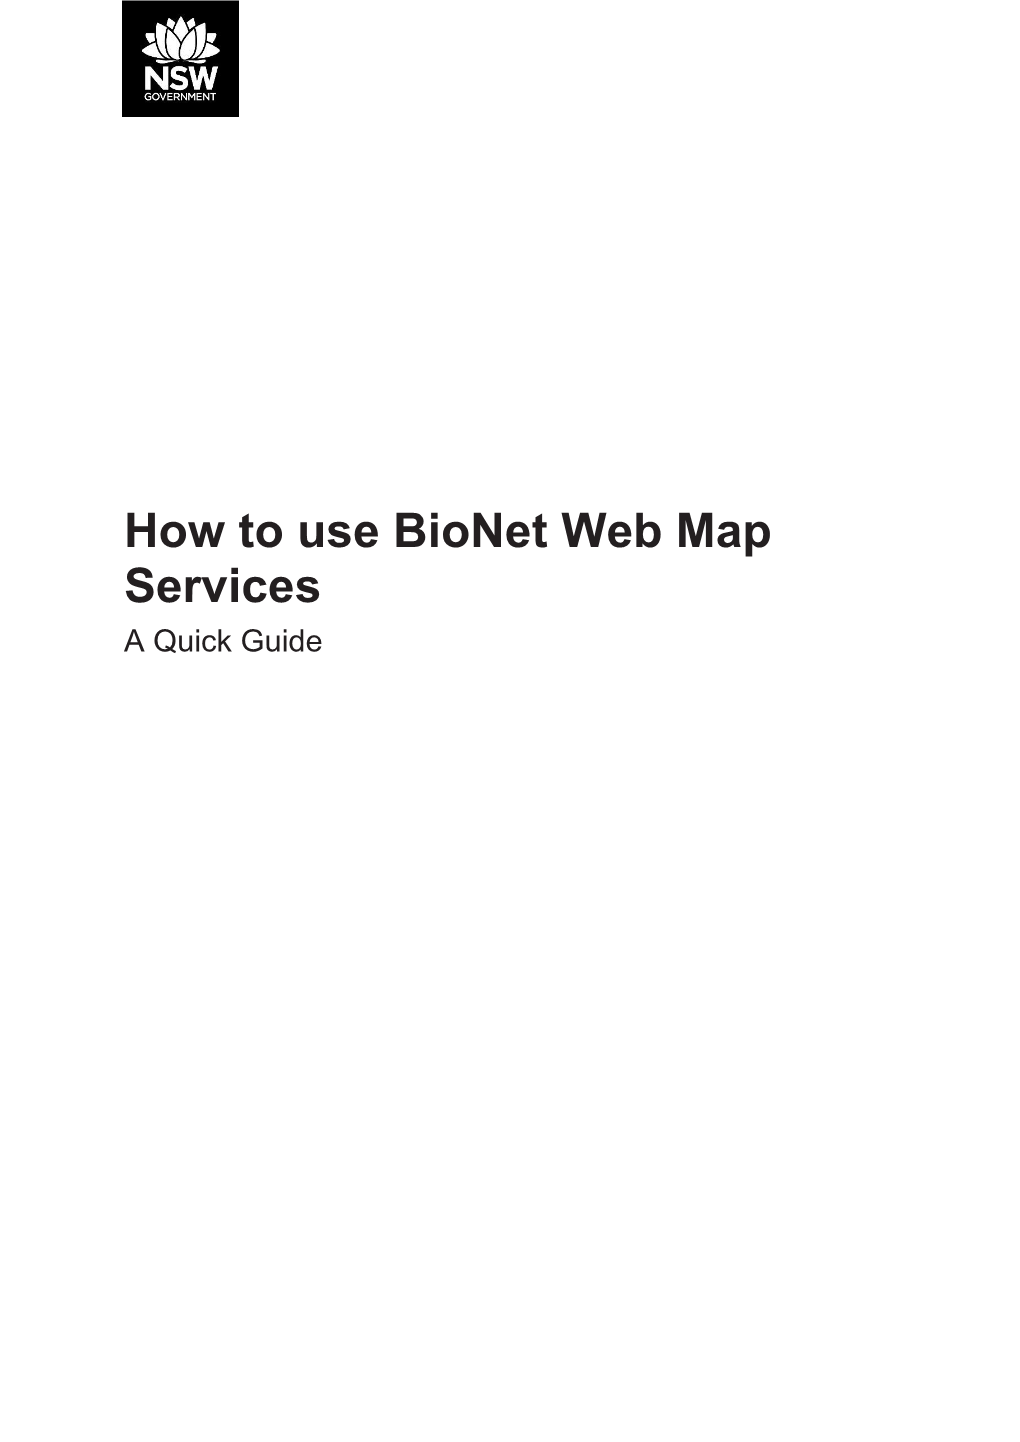 How to Use Bionet Web Map Services a Quick Guide